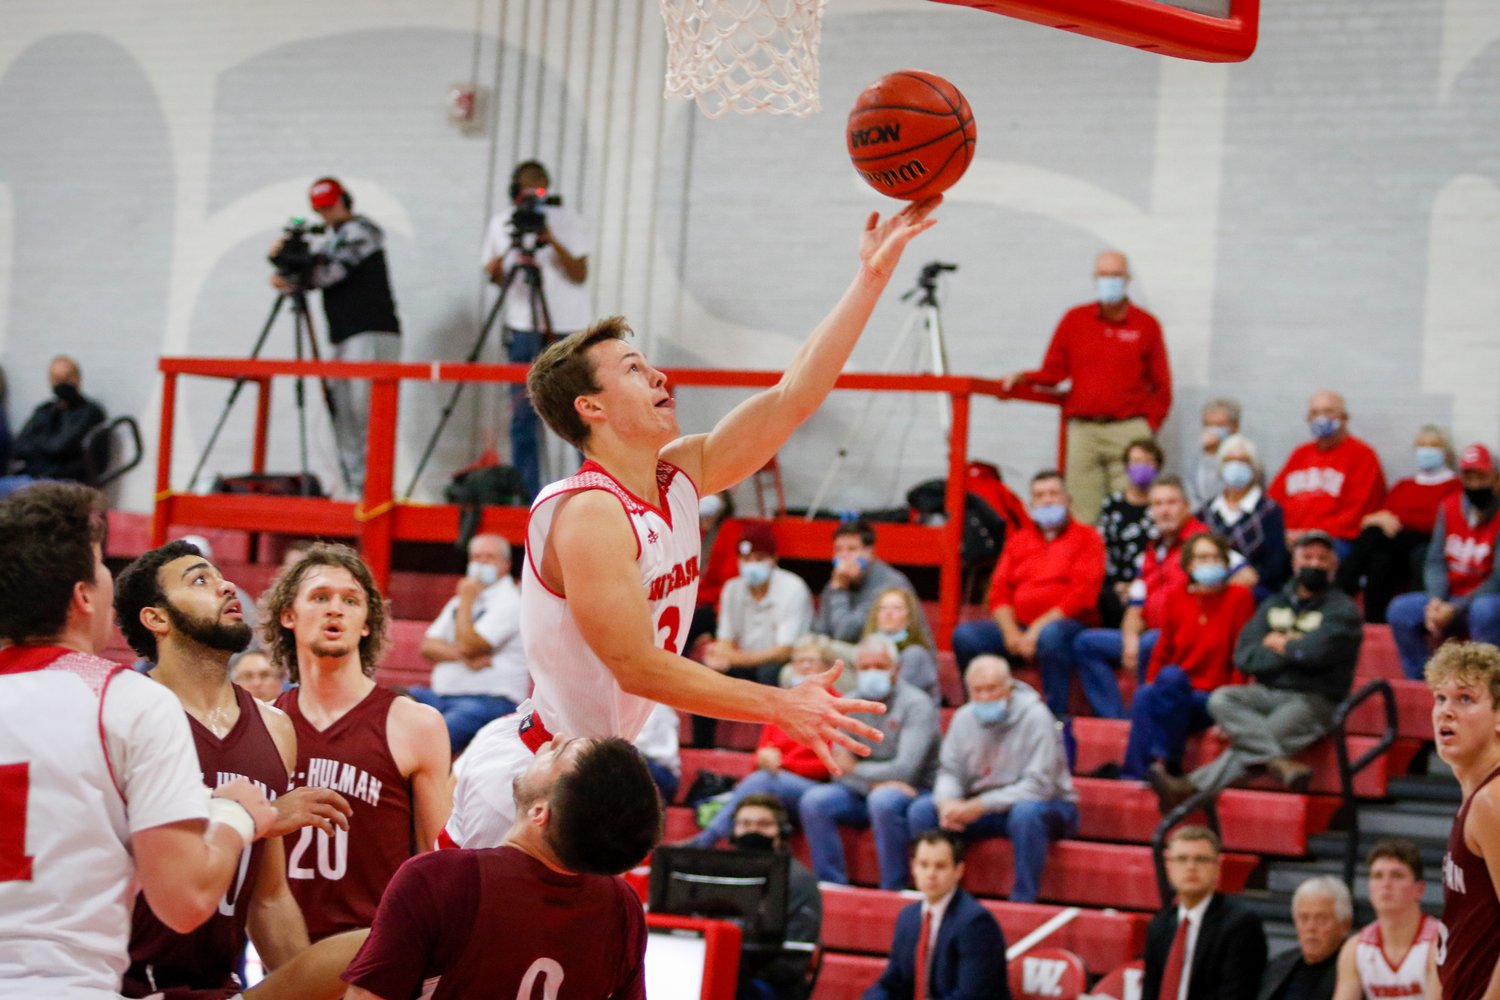 Senior guard Jack Davidson broke the all-time school record with his 536th made free-throw in Wabash’s 67-64 win over Rose Hulman Wednesday evening.